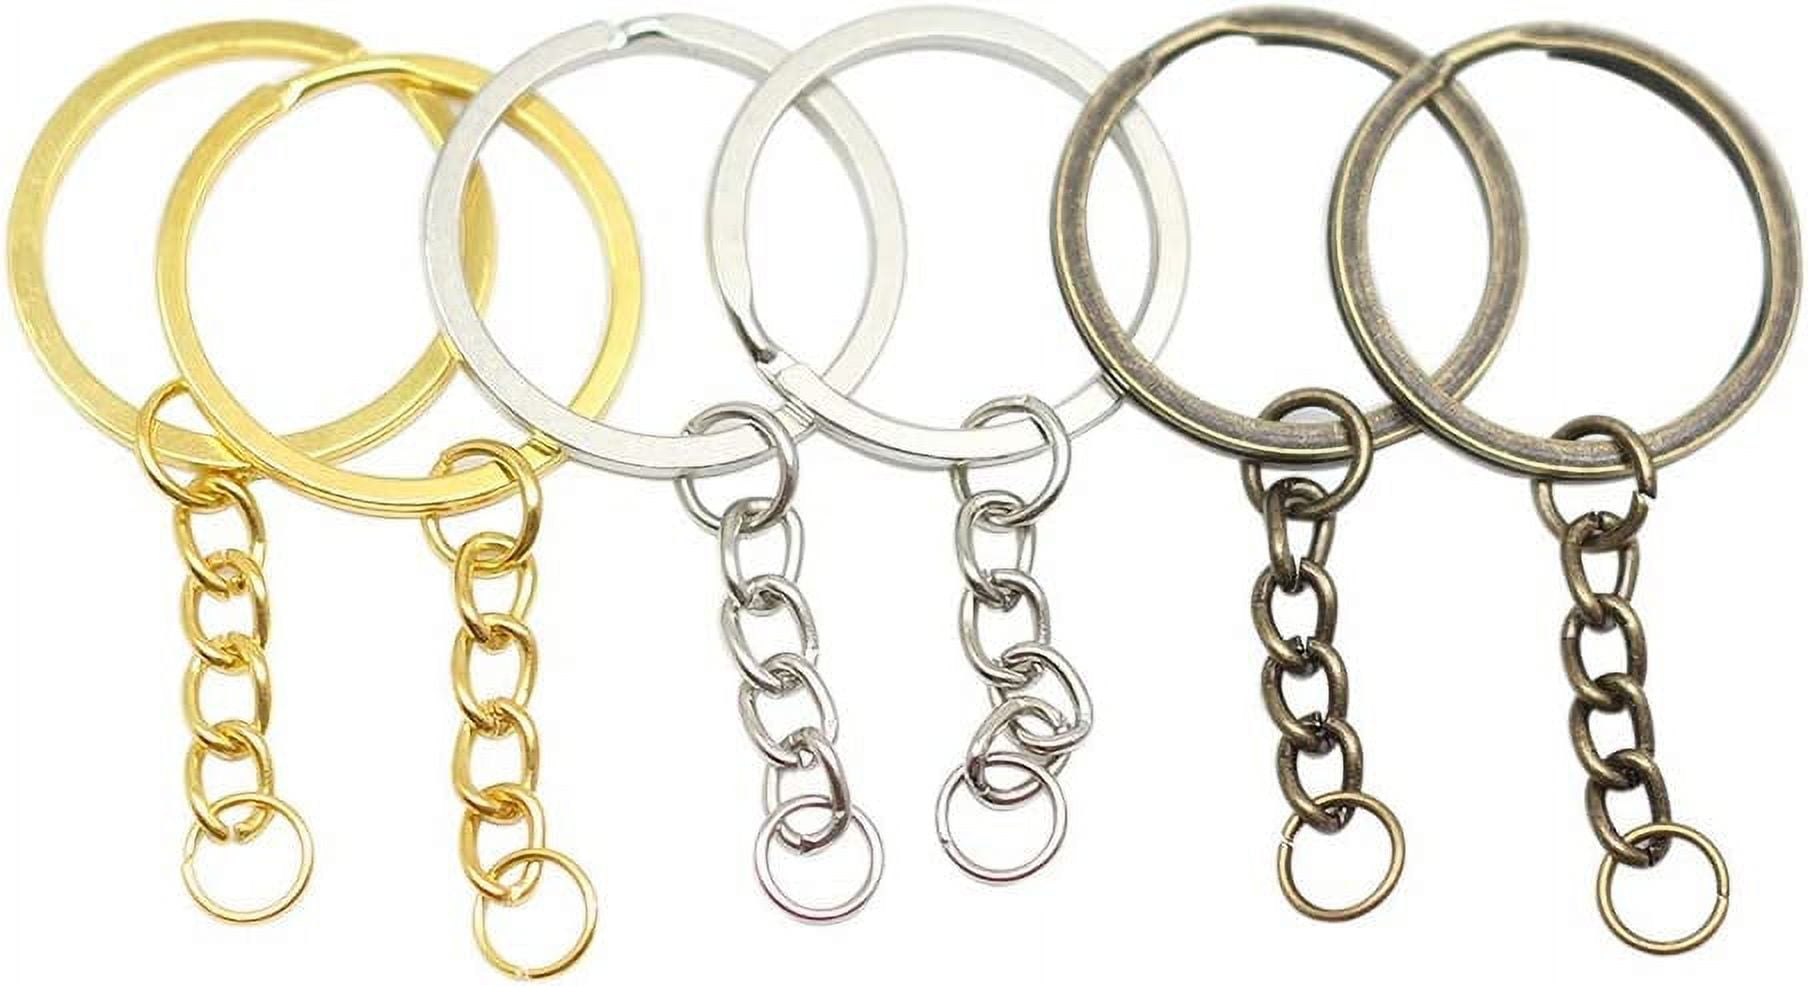 32mm Split Keyring with Heavy Curb Chain Assembly